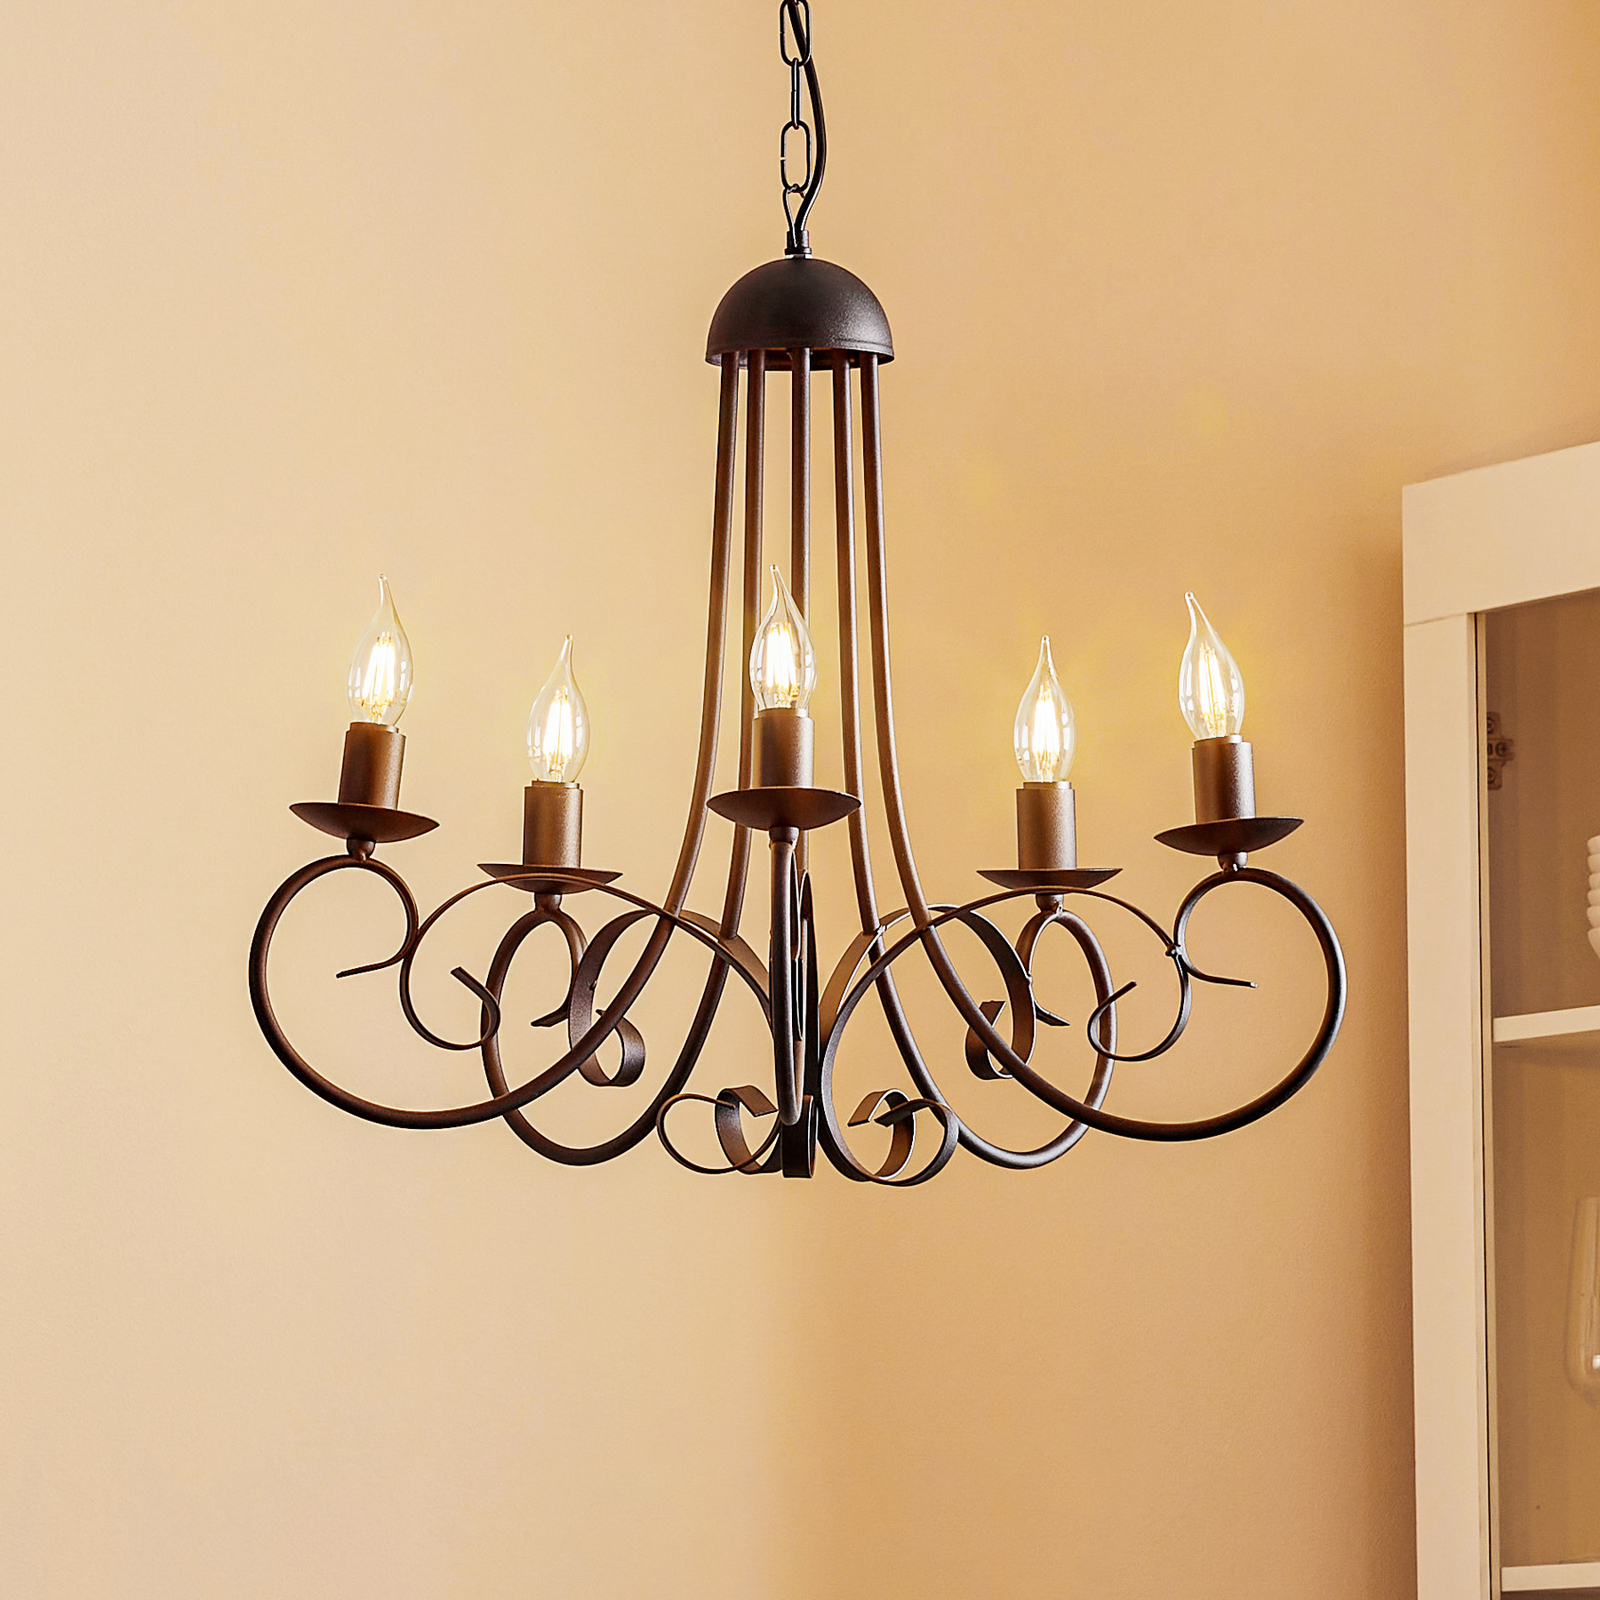 Pompei chandelier, without lampshades, black